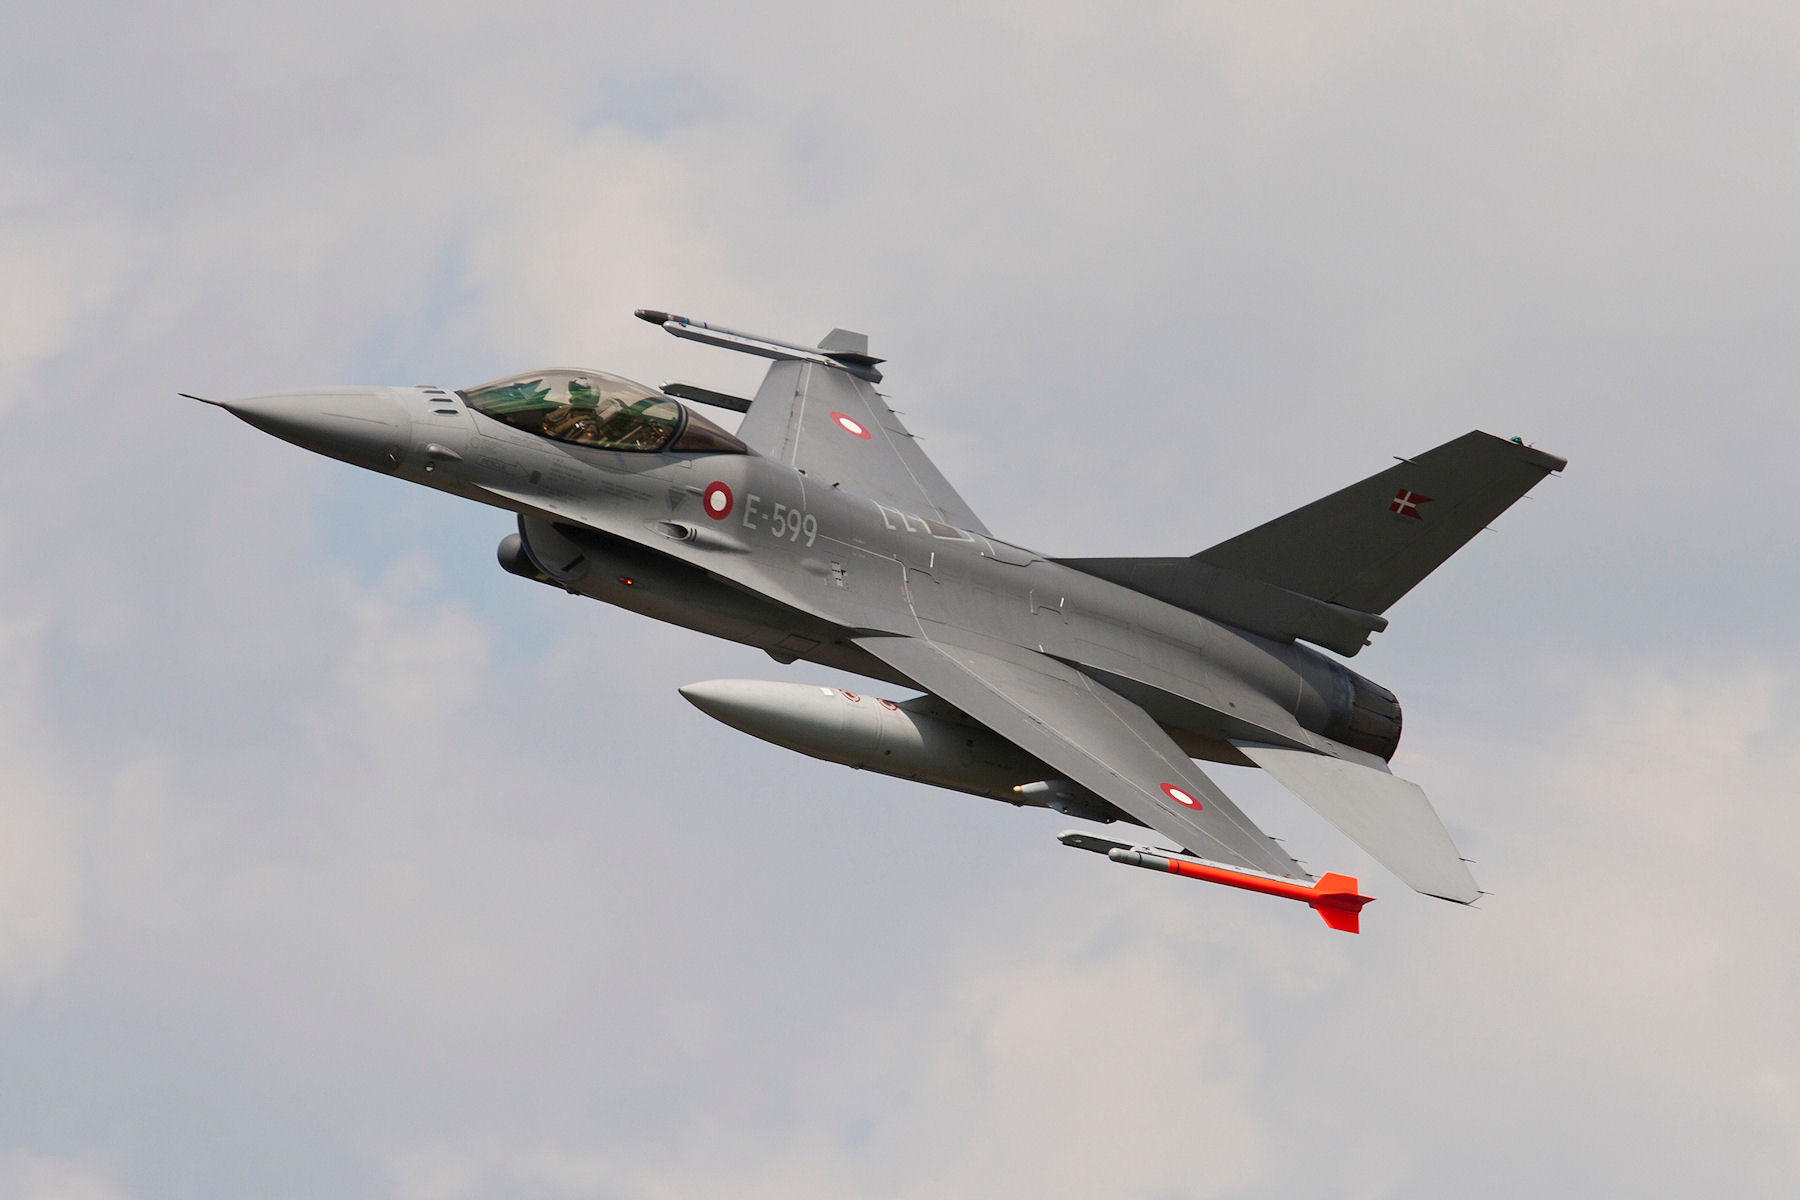 A Danish F-16AM shortly after take-off.